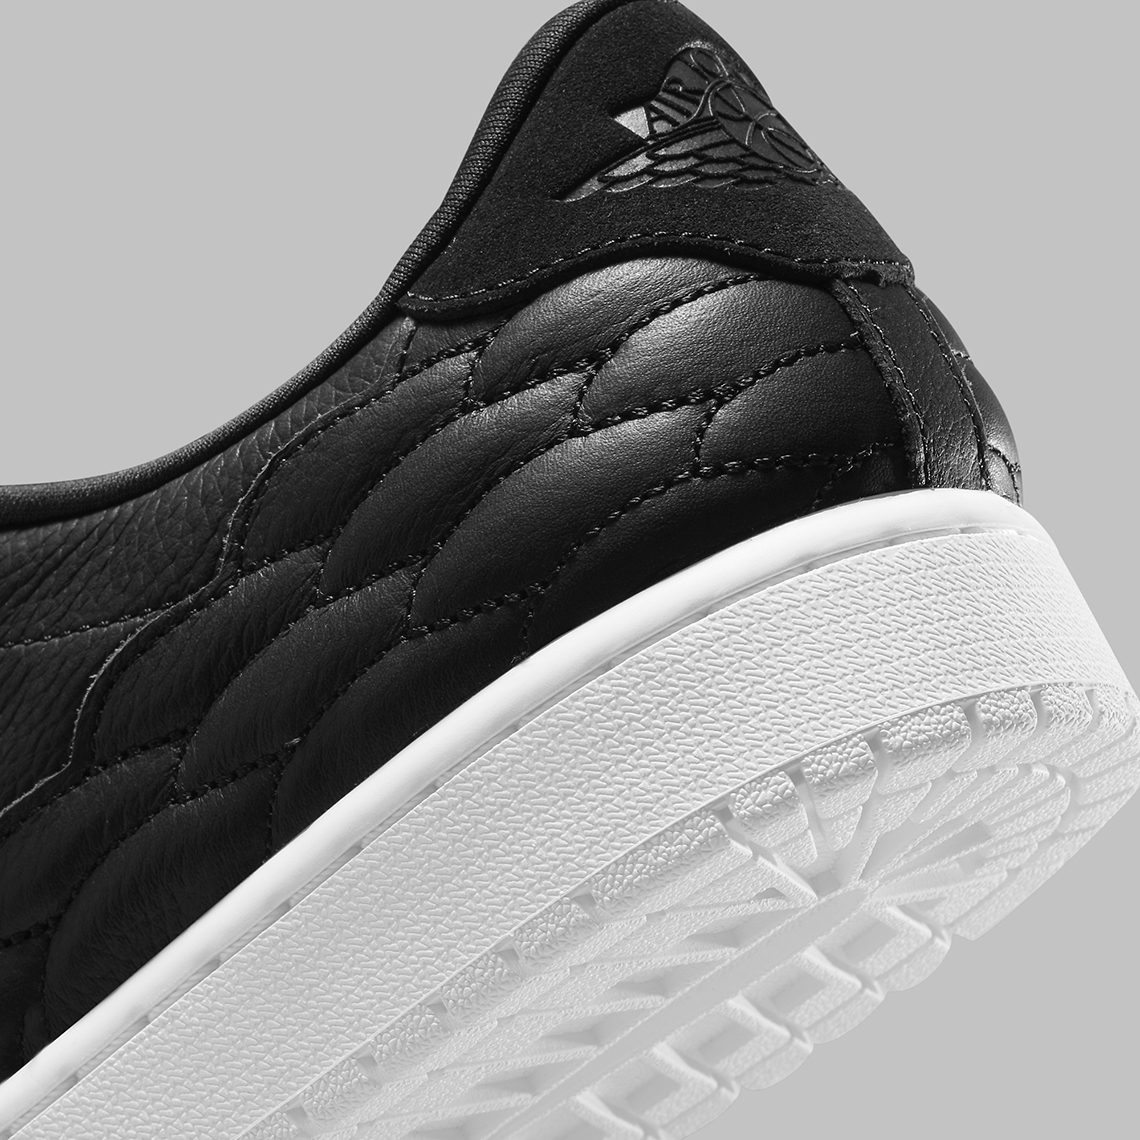 Jordan Brand is taking the "Panda" trend to the golf course with Black White Dj2756 001 4